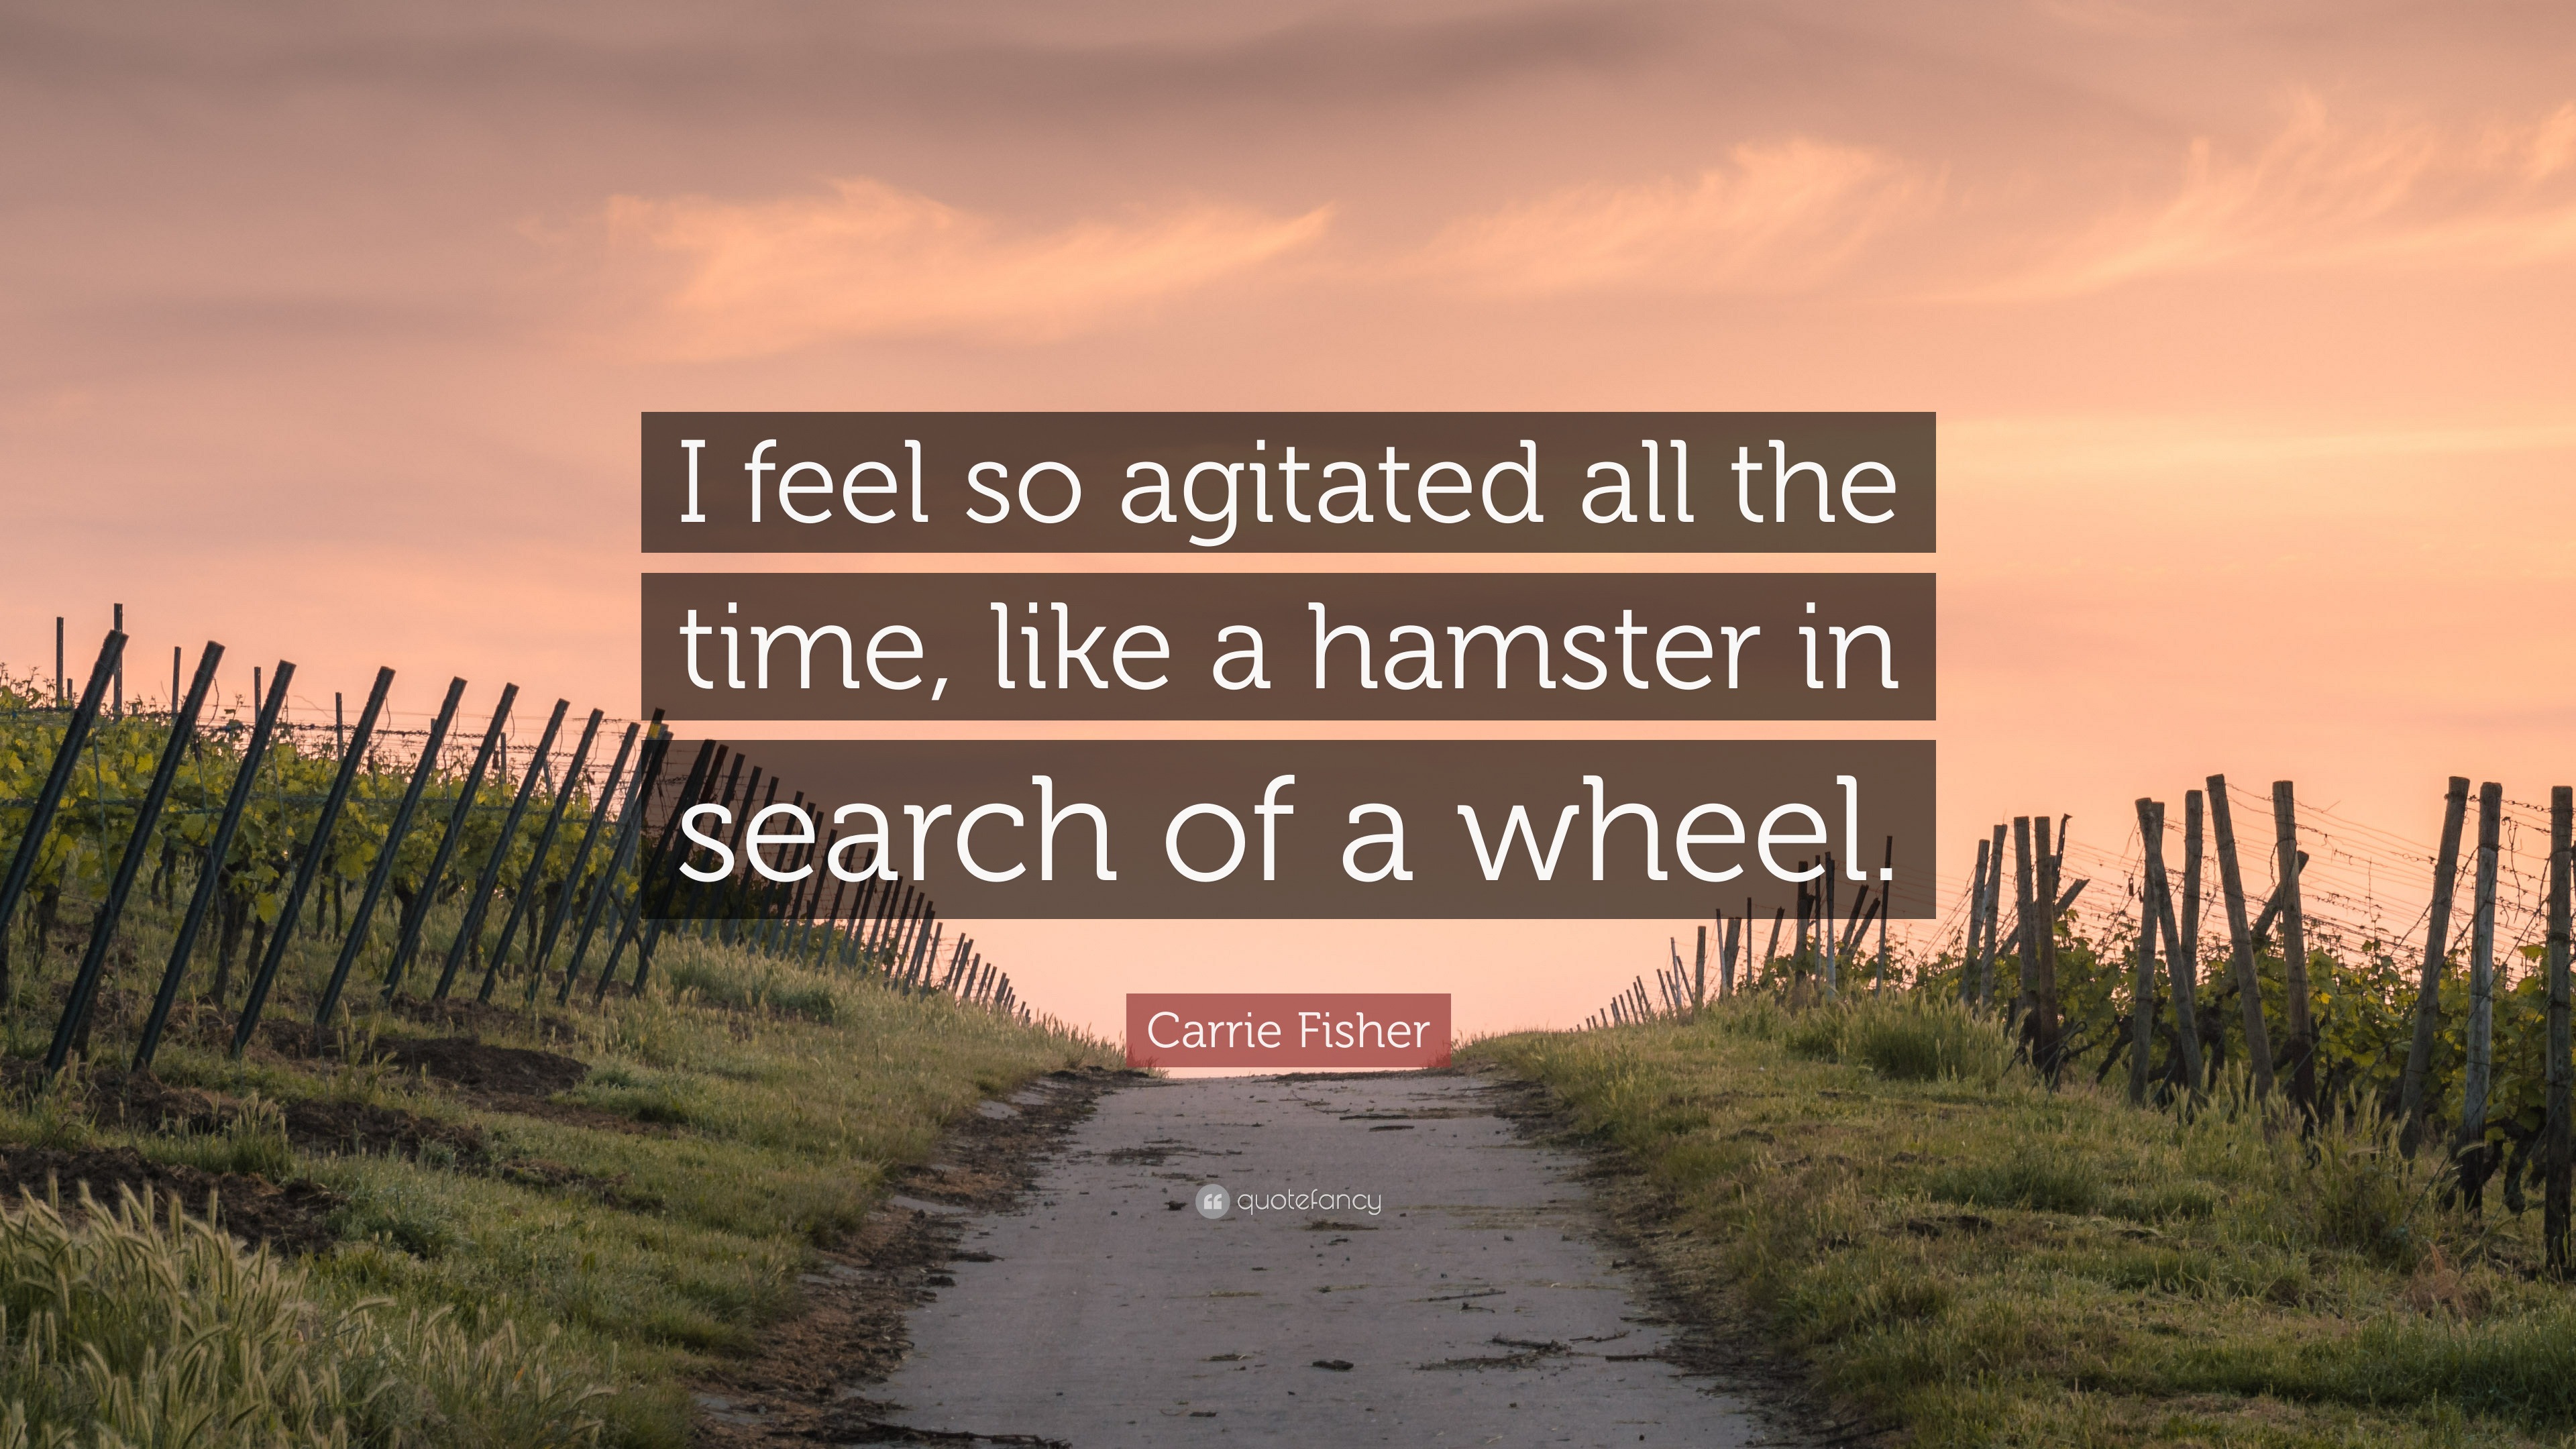 Carrie Fisher Quote: “I feel so agitated all the time, like a hamster ...